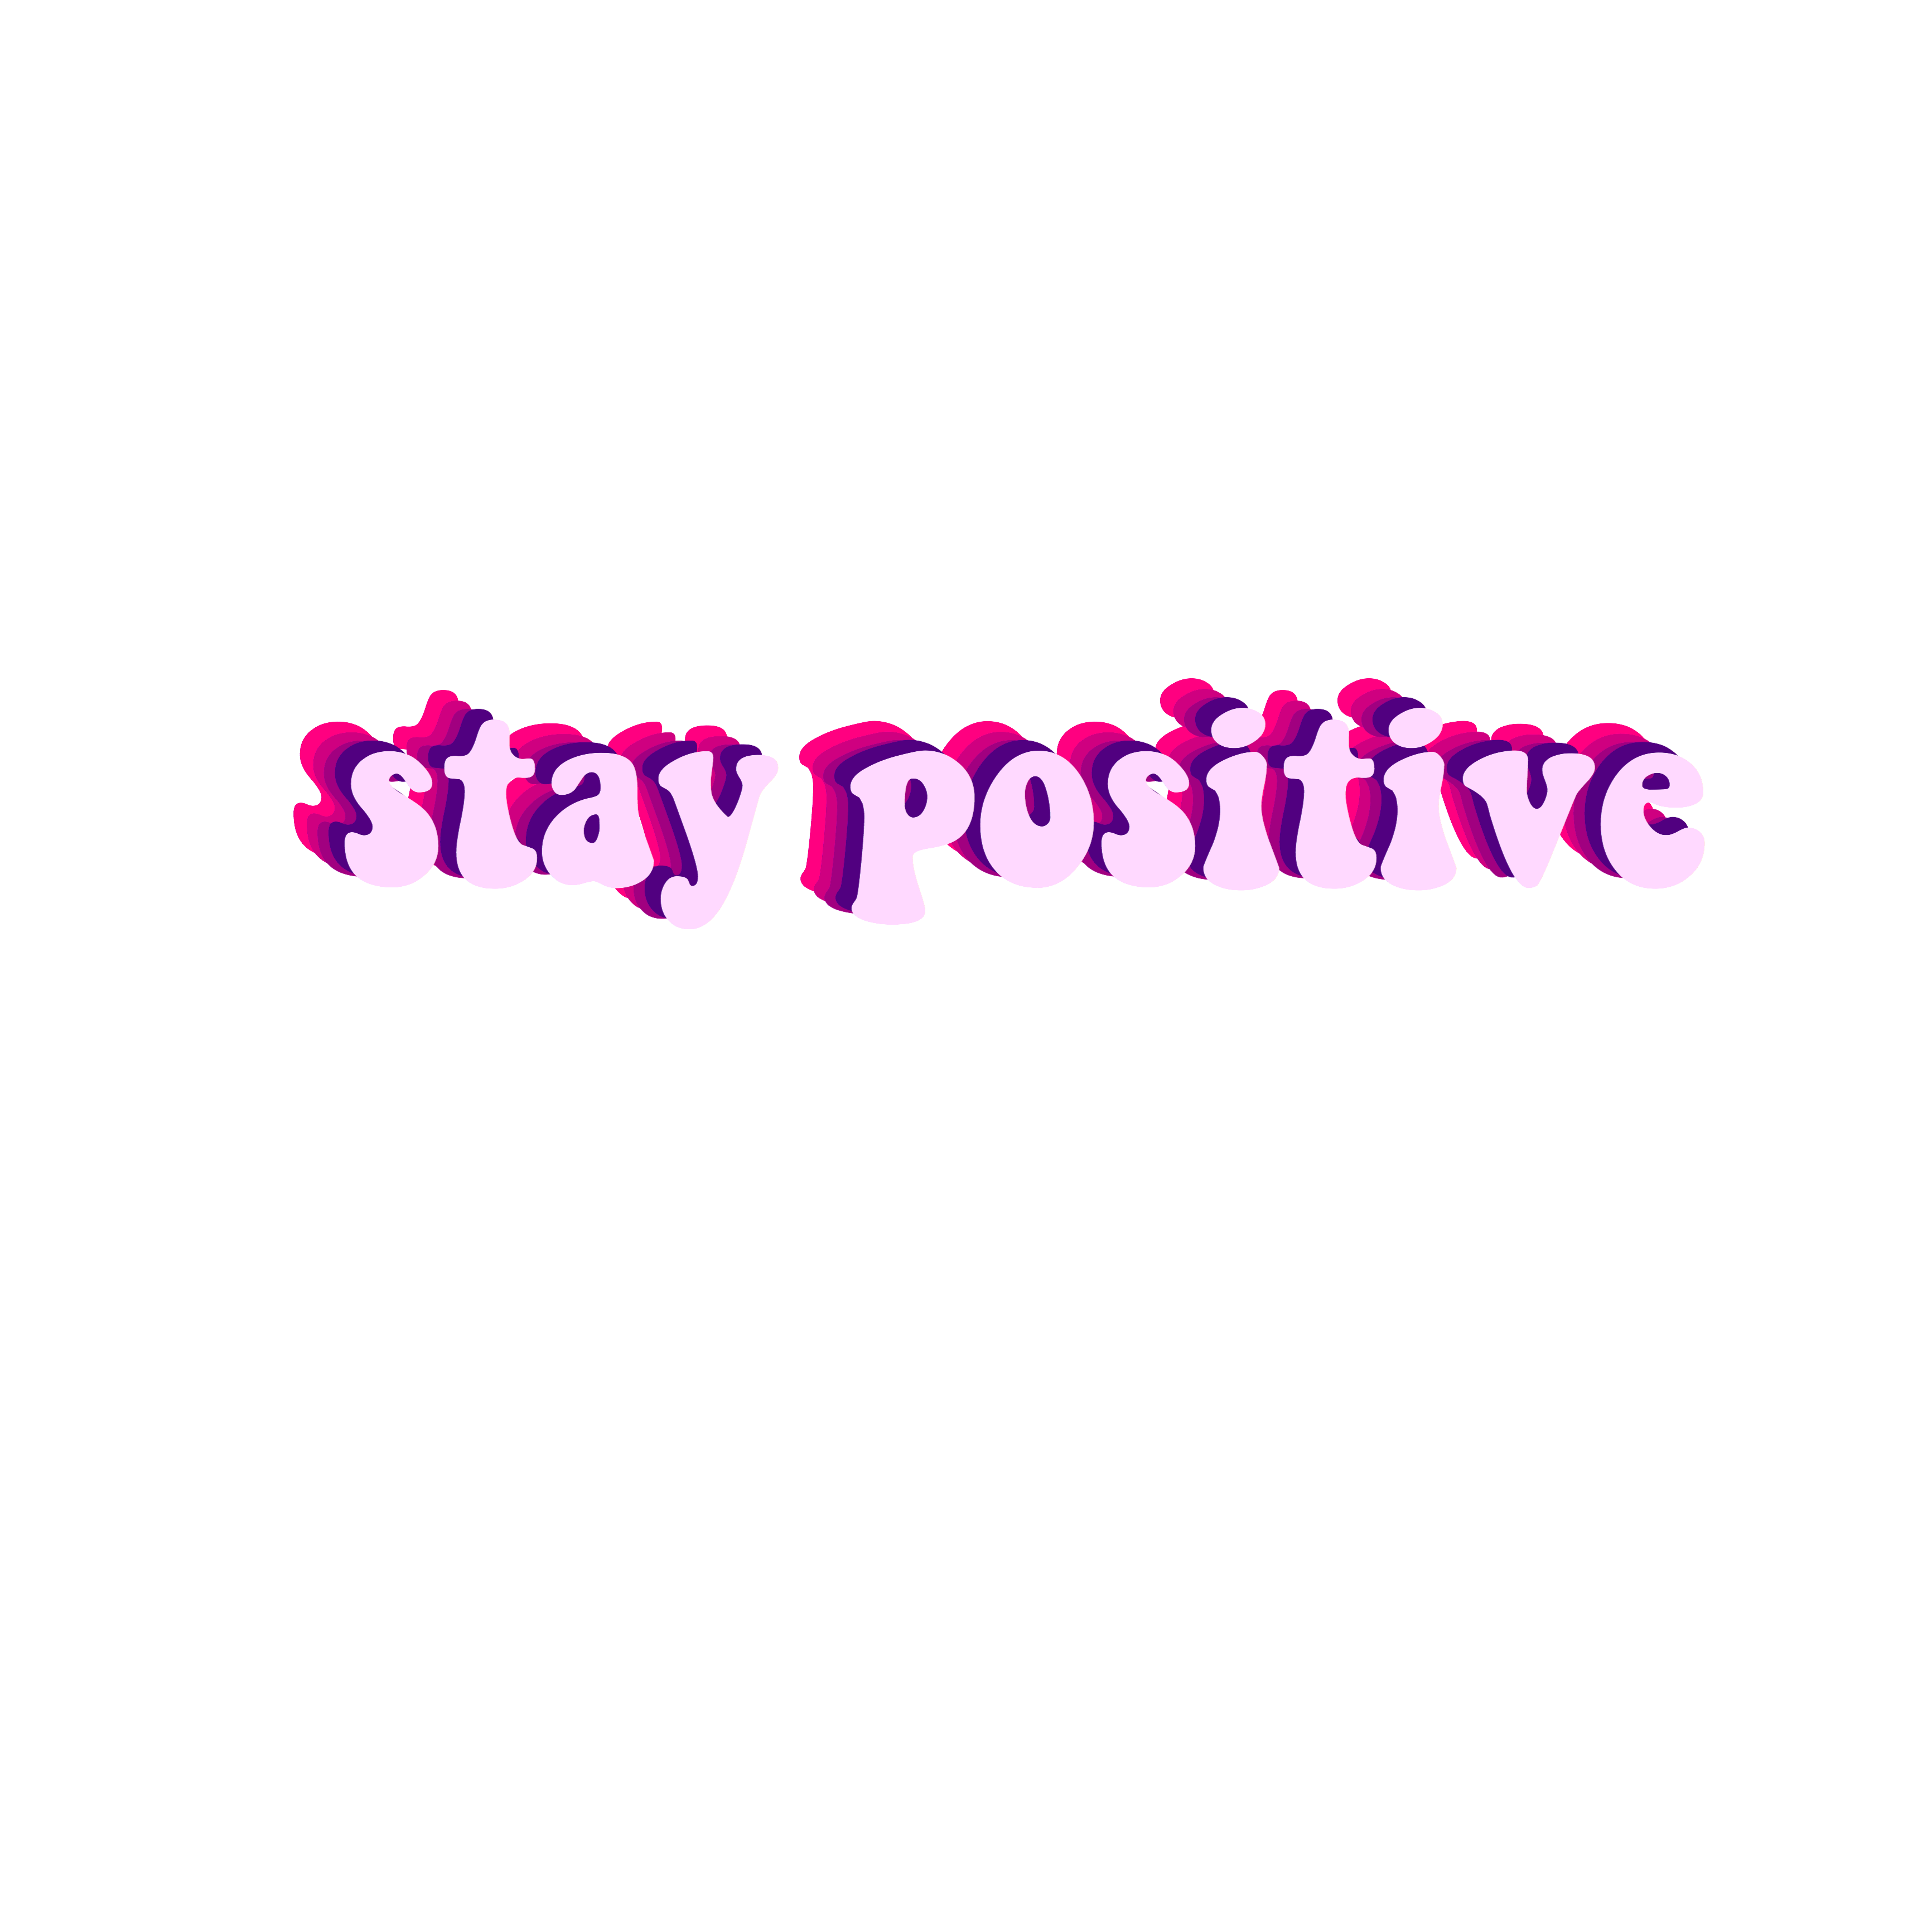 The Most Edited Stay Positive Picsart